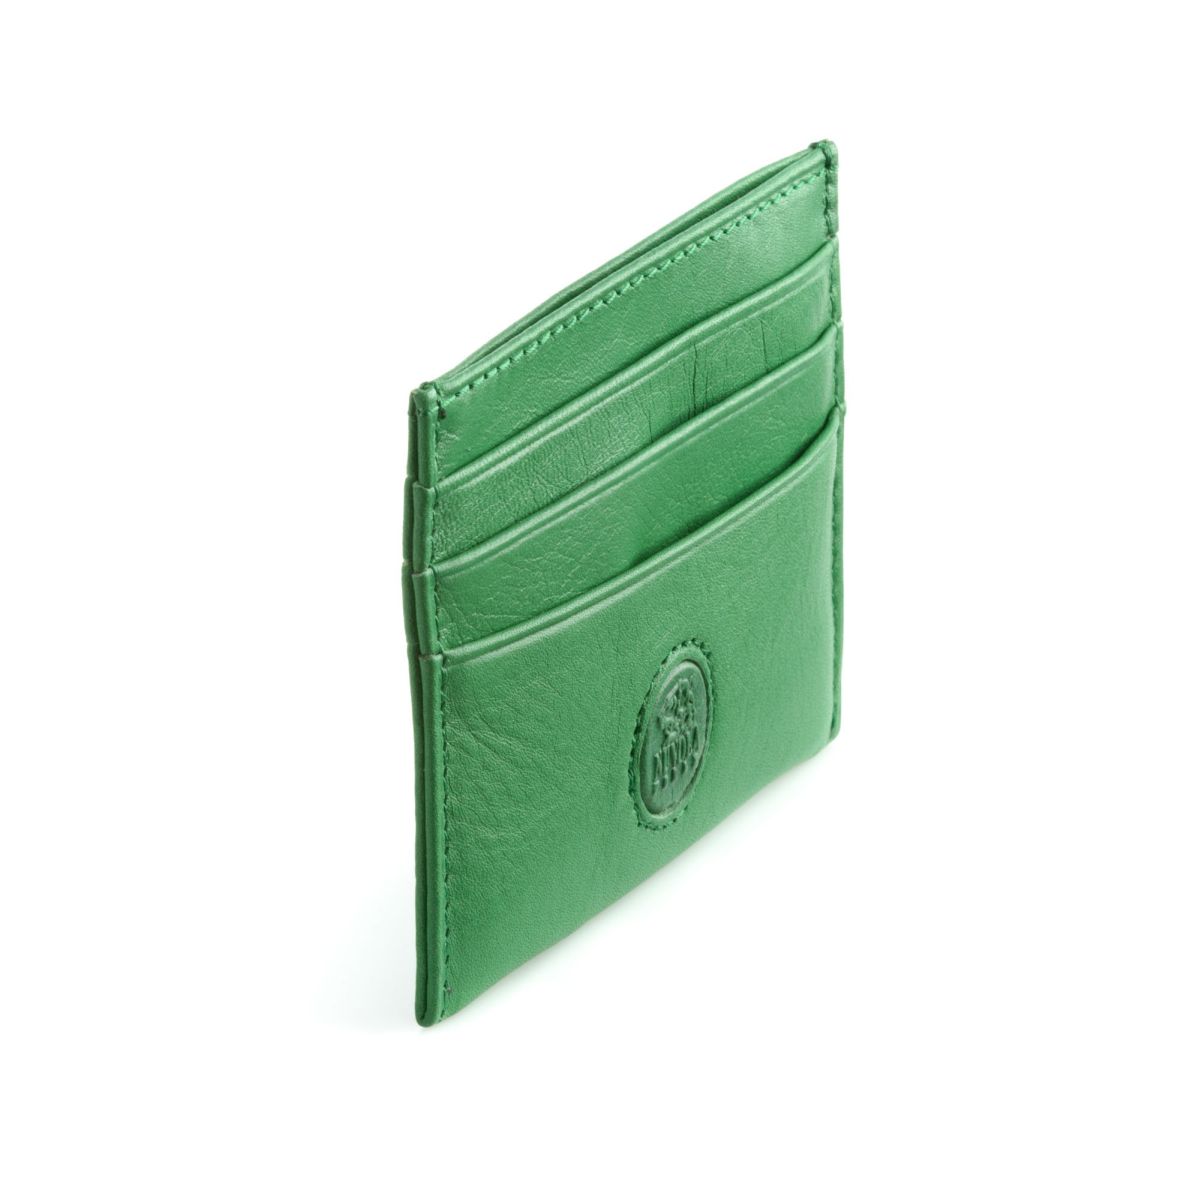 NUVOLA PELLE Minimalist leather credit card wallet - Green